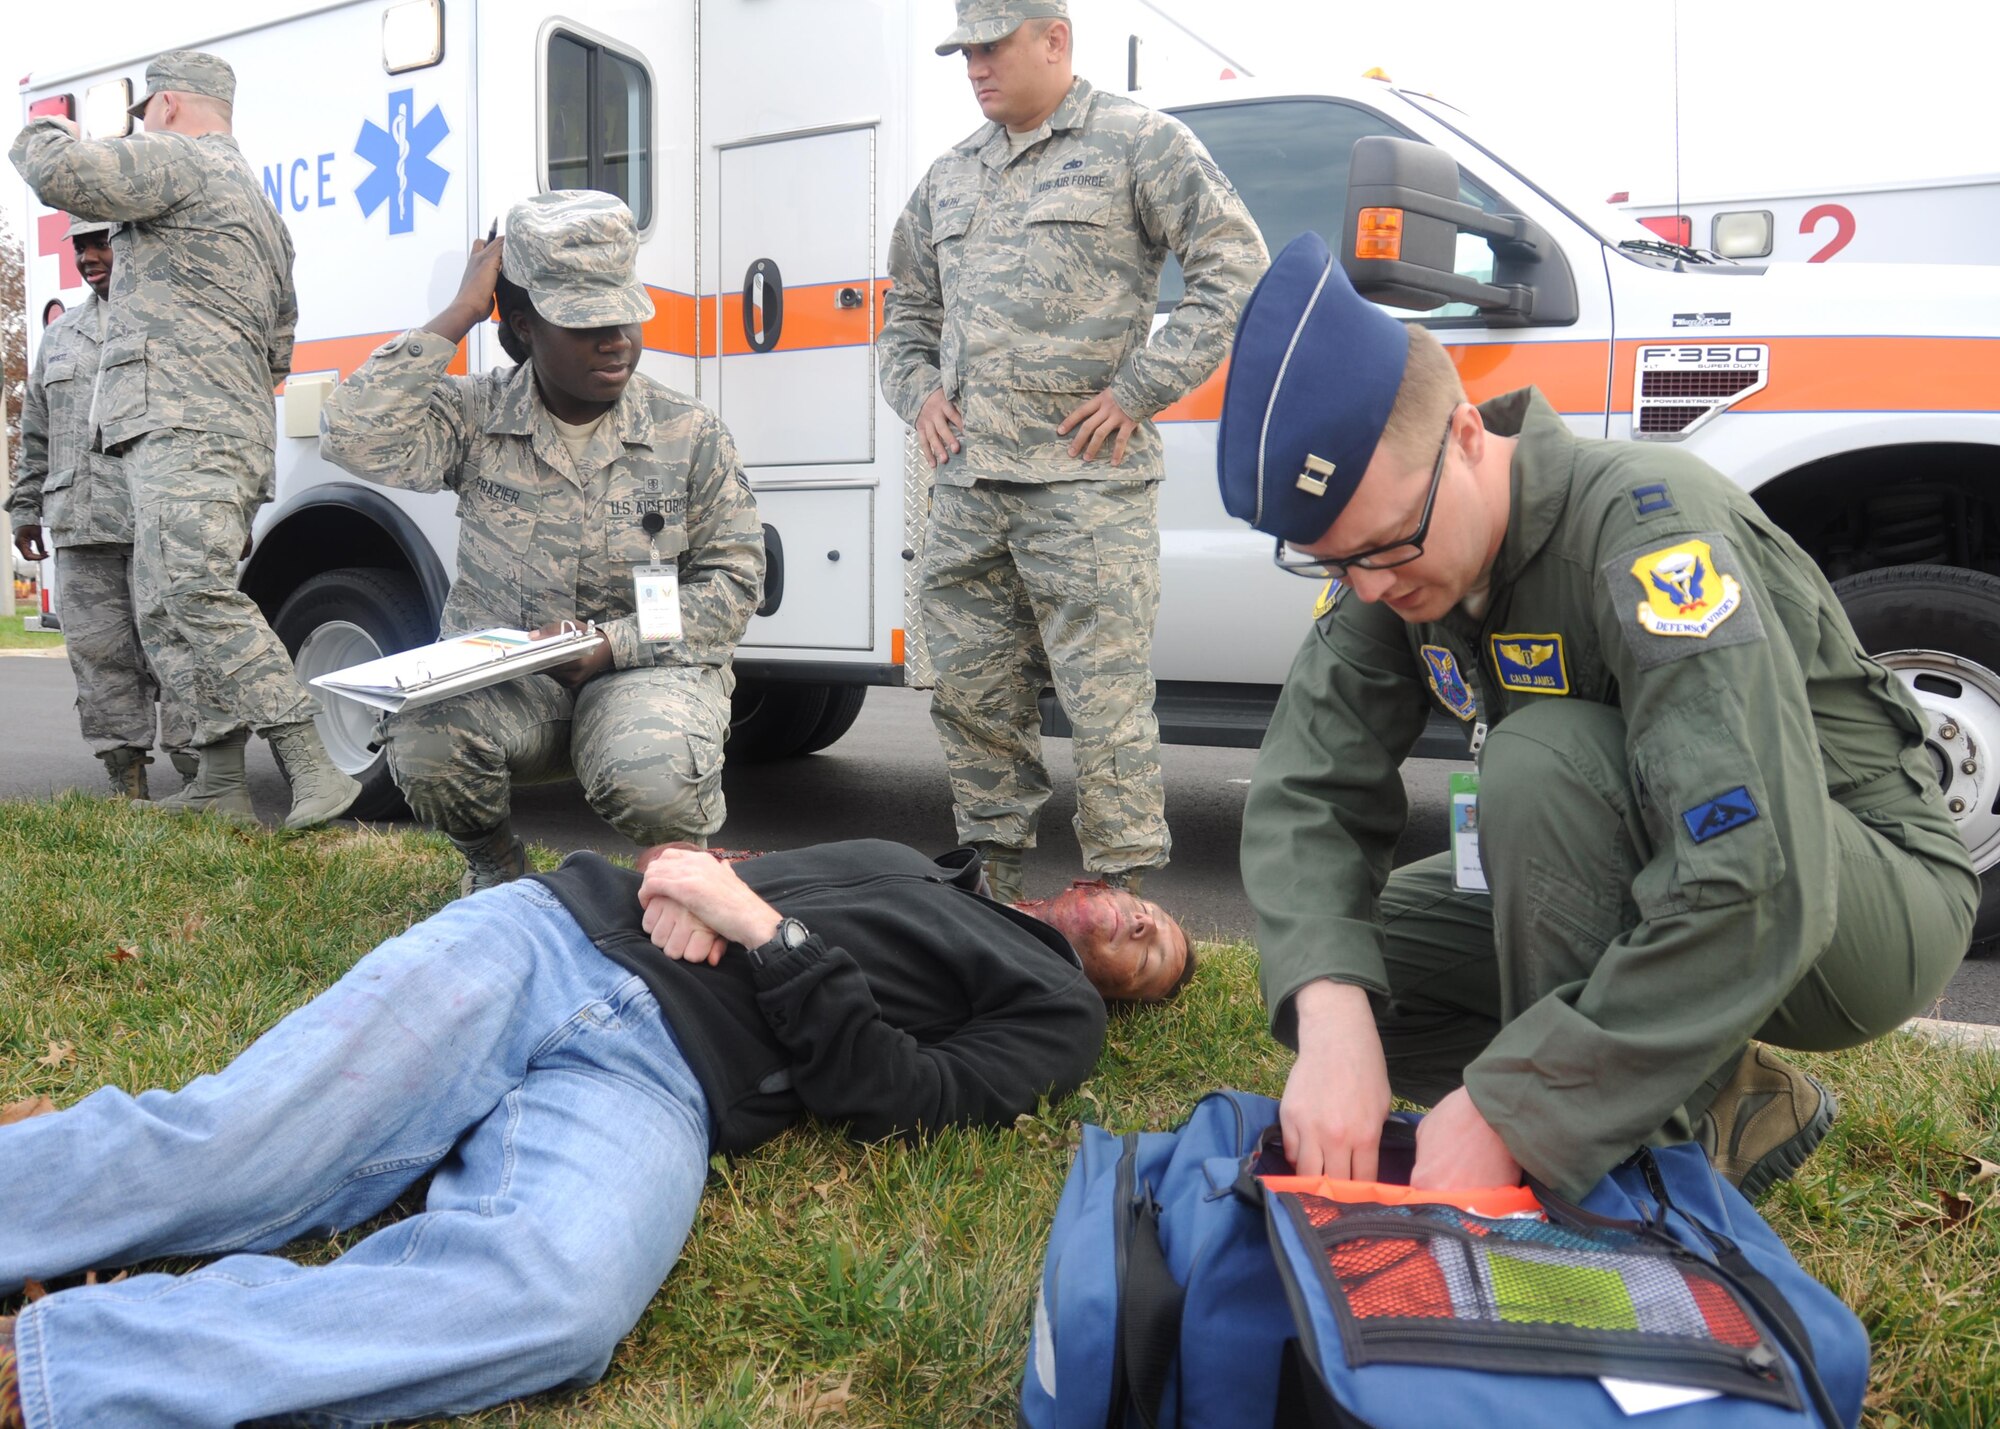 Medical personnel respond to a simulated mass casualty scenario during a total force exercise at Whiteman Air Force Base, Mo., Dec. 3, 2016. Volunteers were given different roles to simulate the varying degree of victims' temperaments and injuries. (U.S. Air Force photo/Senior Airman Missy Sterling)